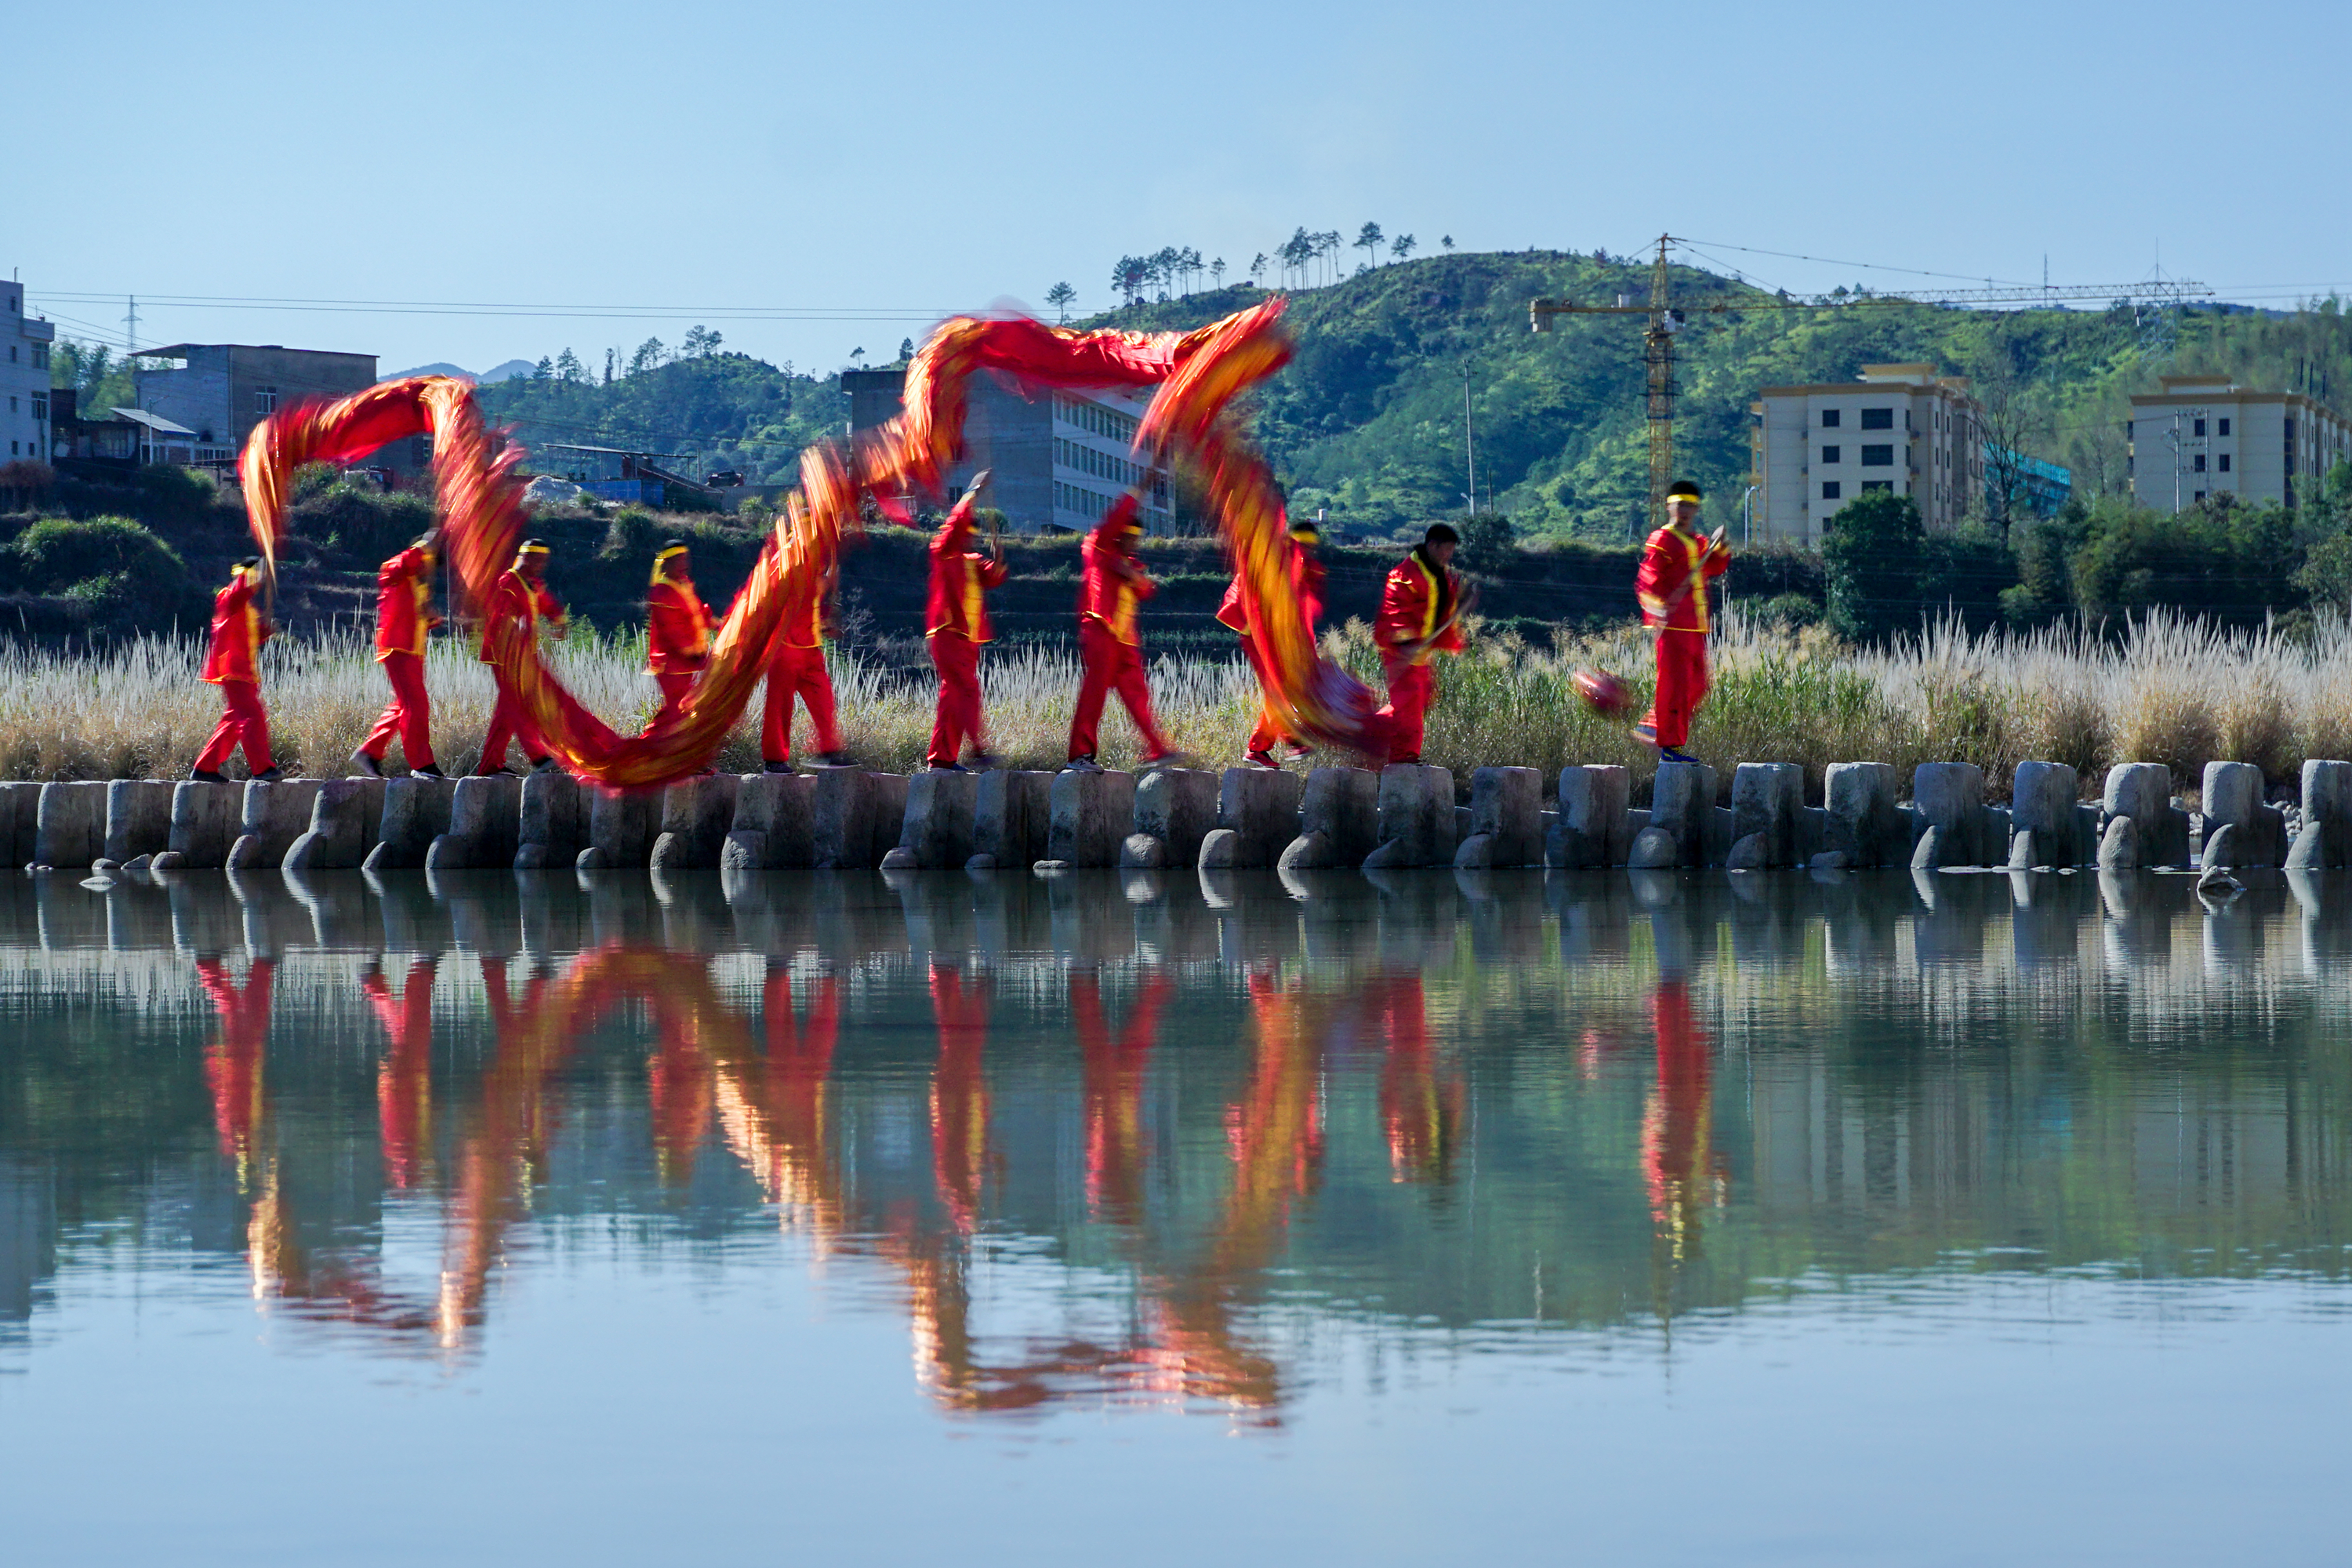 The red and gold dragon complements its reflection in the water. /CFP